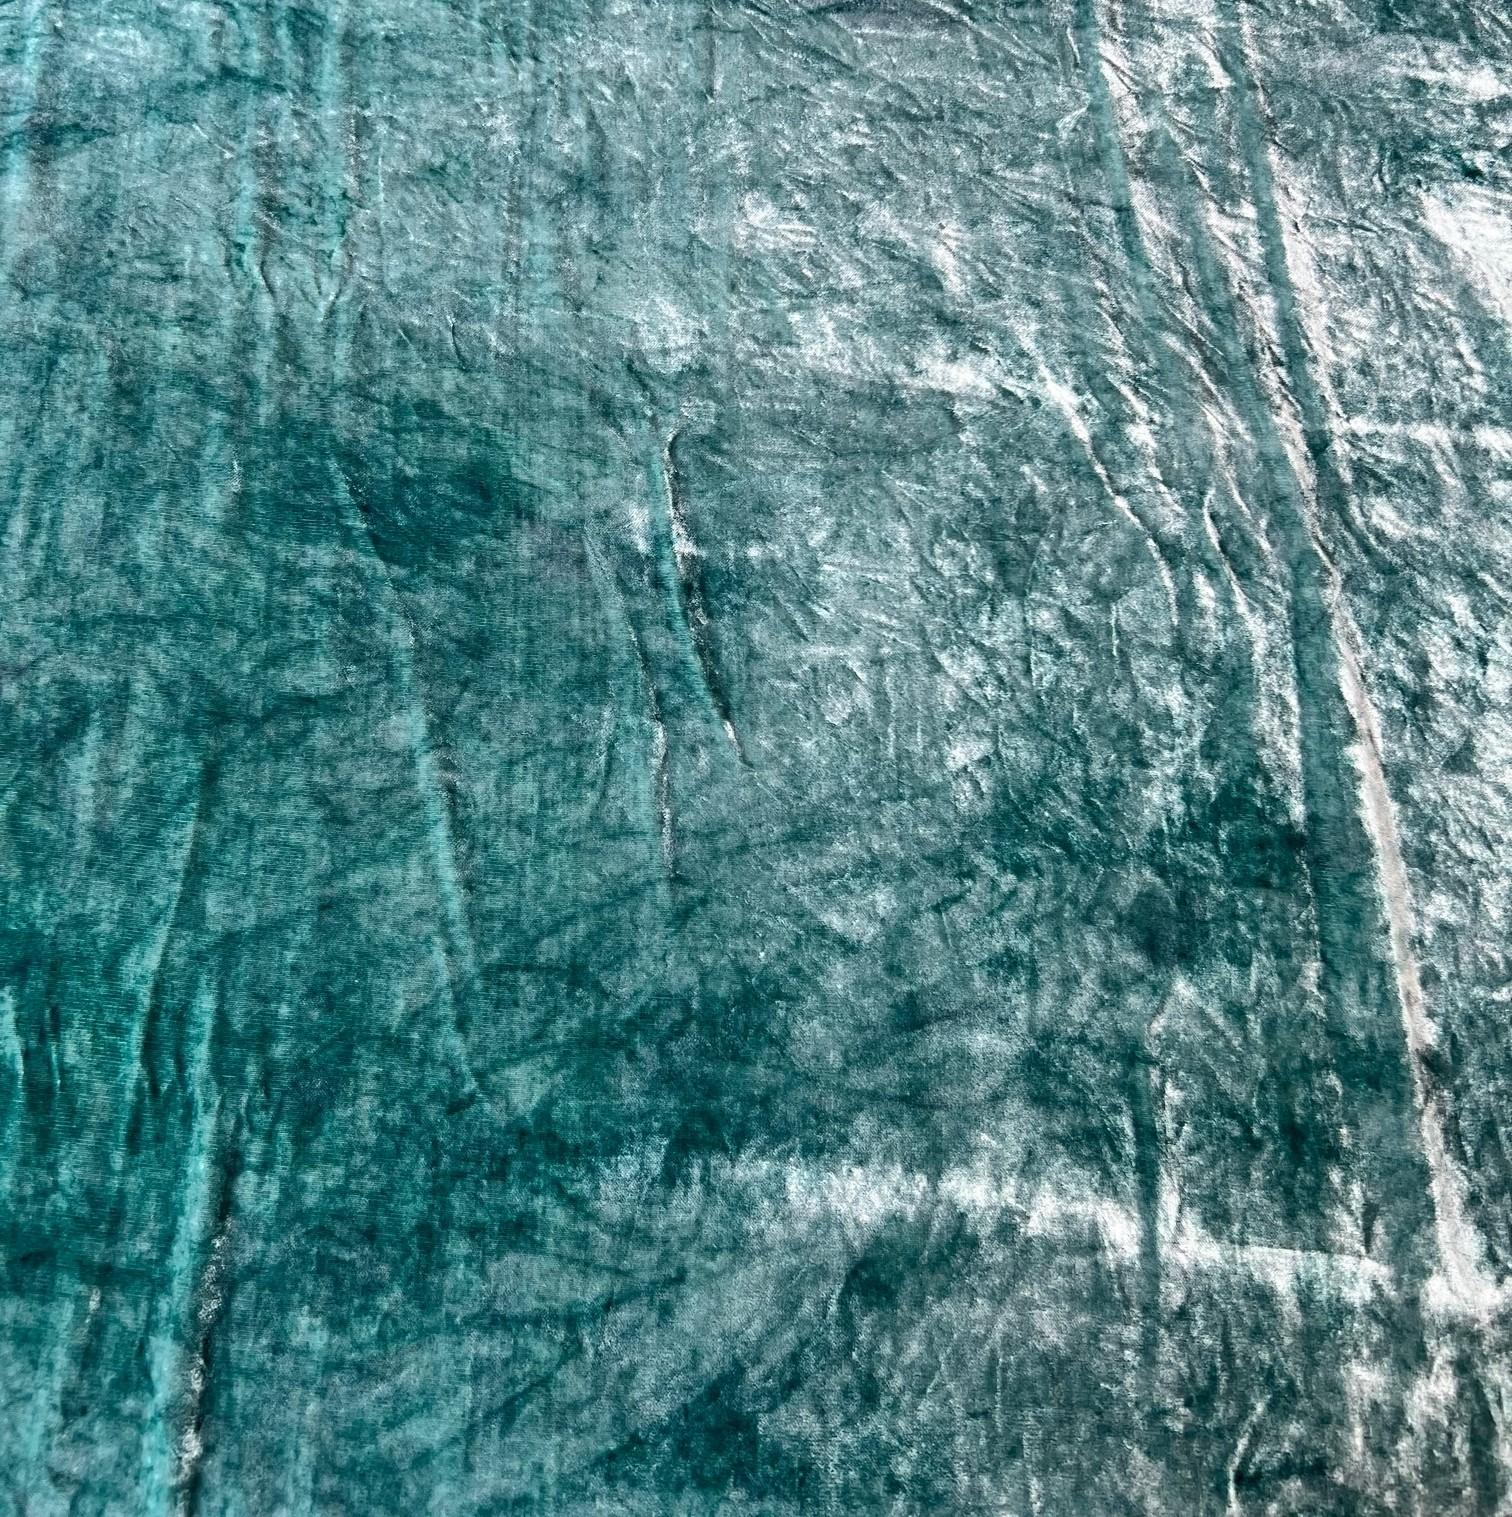 21st century hand dyed Fortuny silk velour velvet fabric in a rich teal color. This is a sumptuous and tactile velvet fabric.

In the early 20th century, the velvet Fortuny used was a very light silk velvet that he imported from France and came in